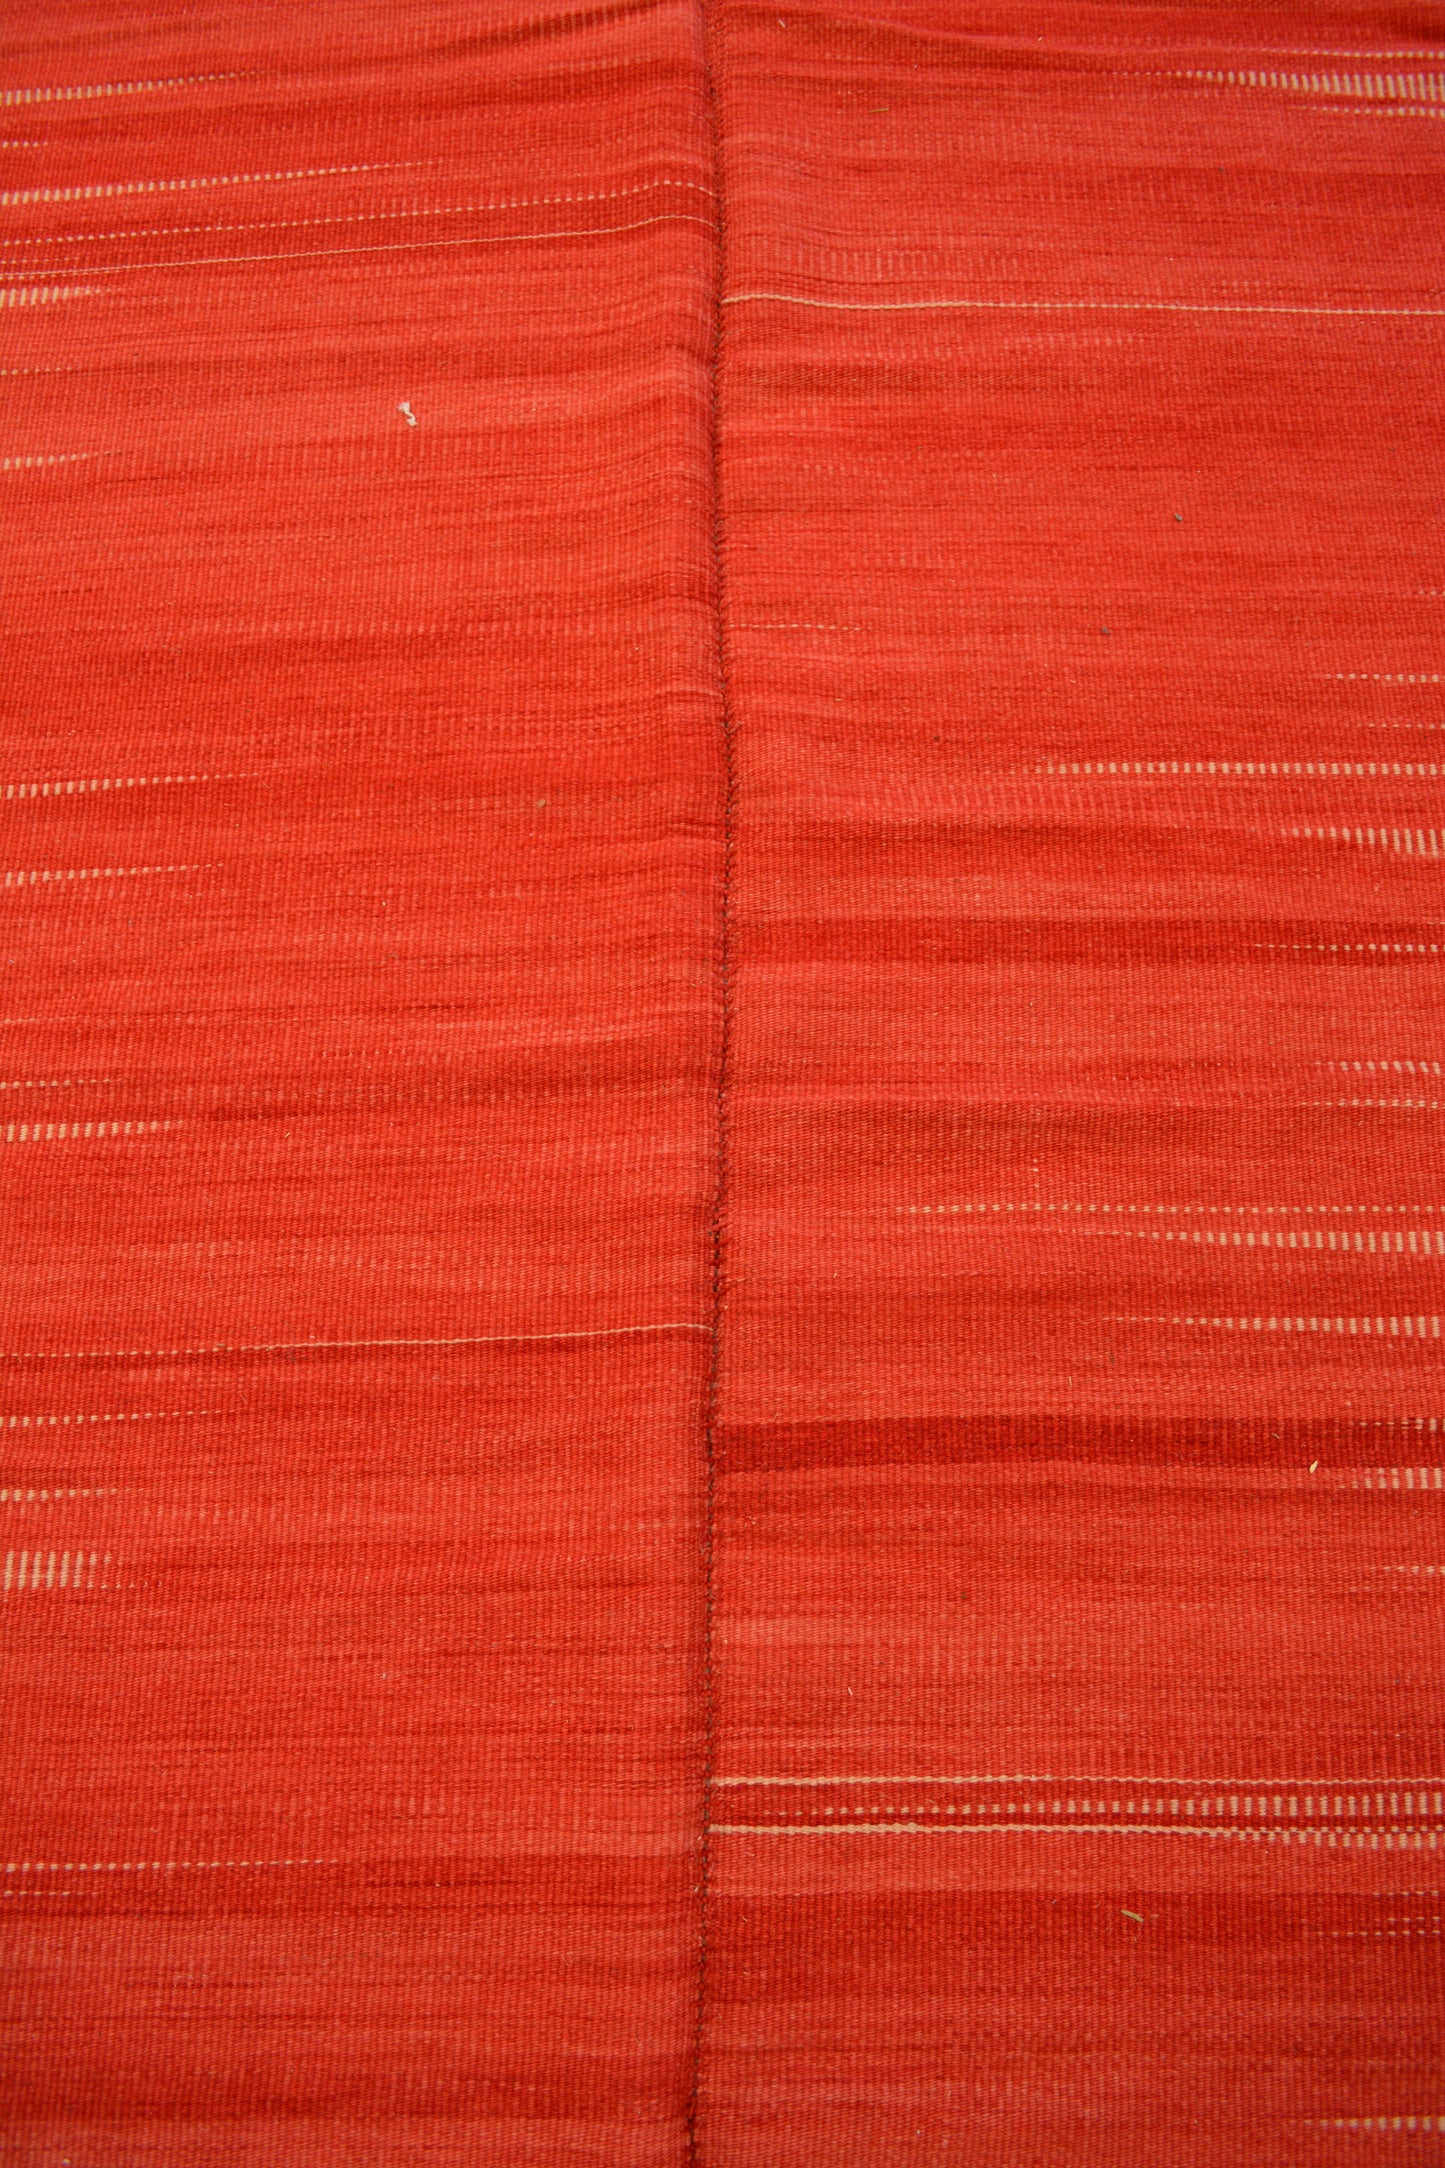 The rug's center renders a divisor line and plain red background.